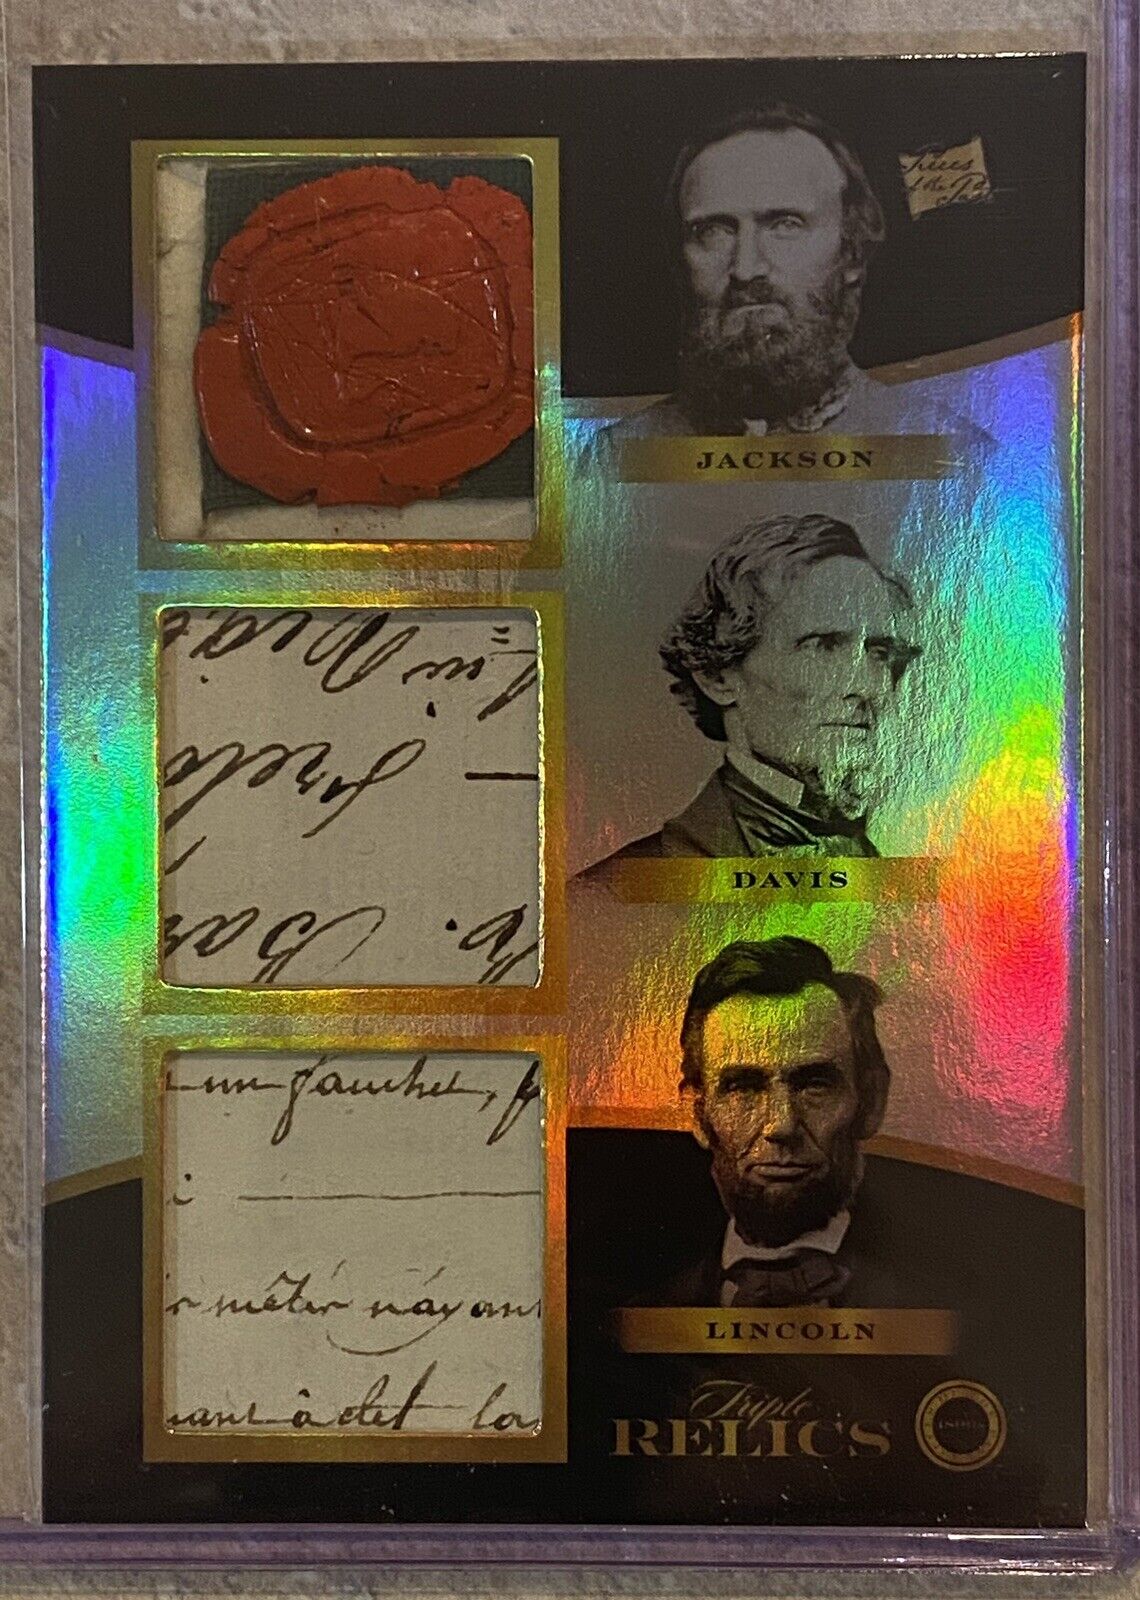 2024 PIECES OF THE PAST 1800’S TRIPLE RELIC ABRAHAM LINCOLN DAVIS JACKSON SEAL